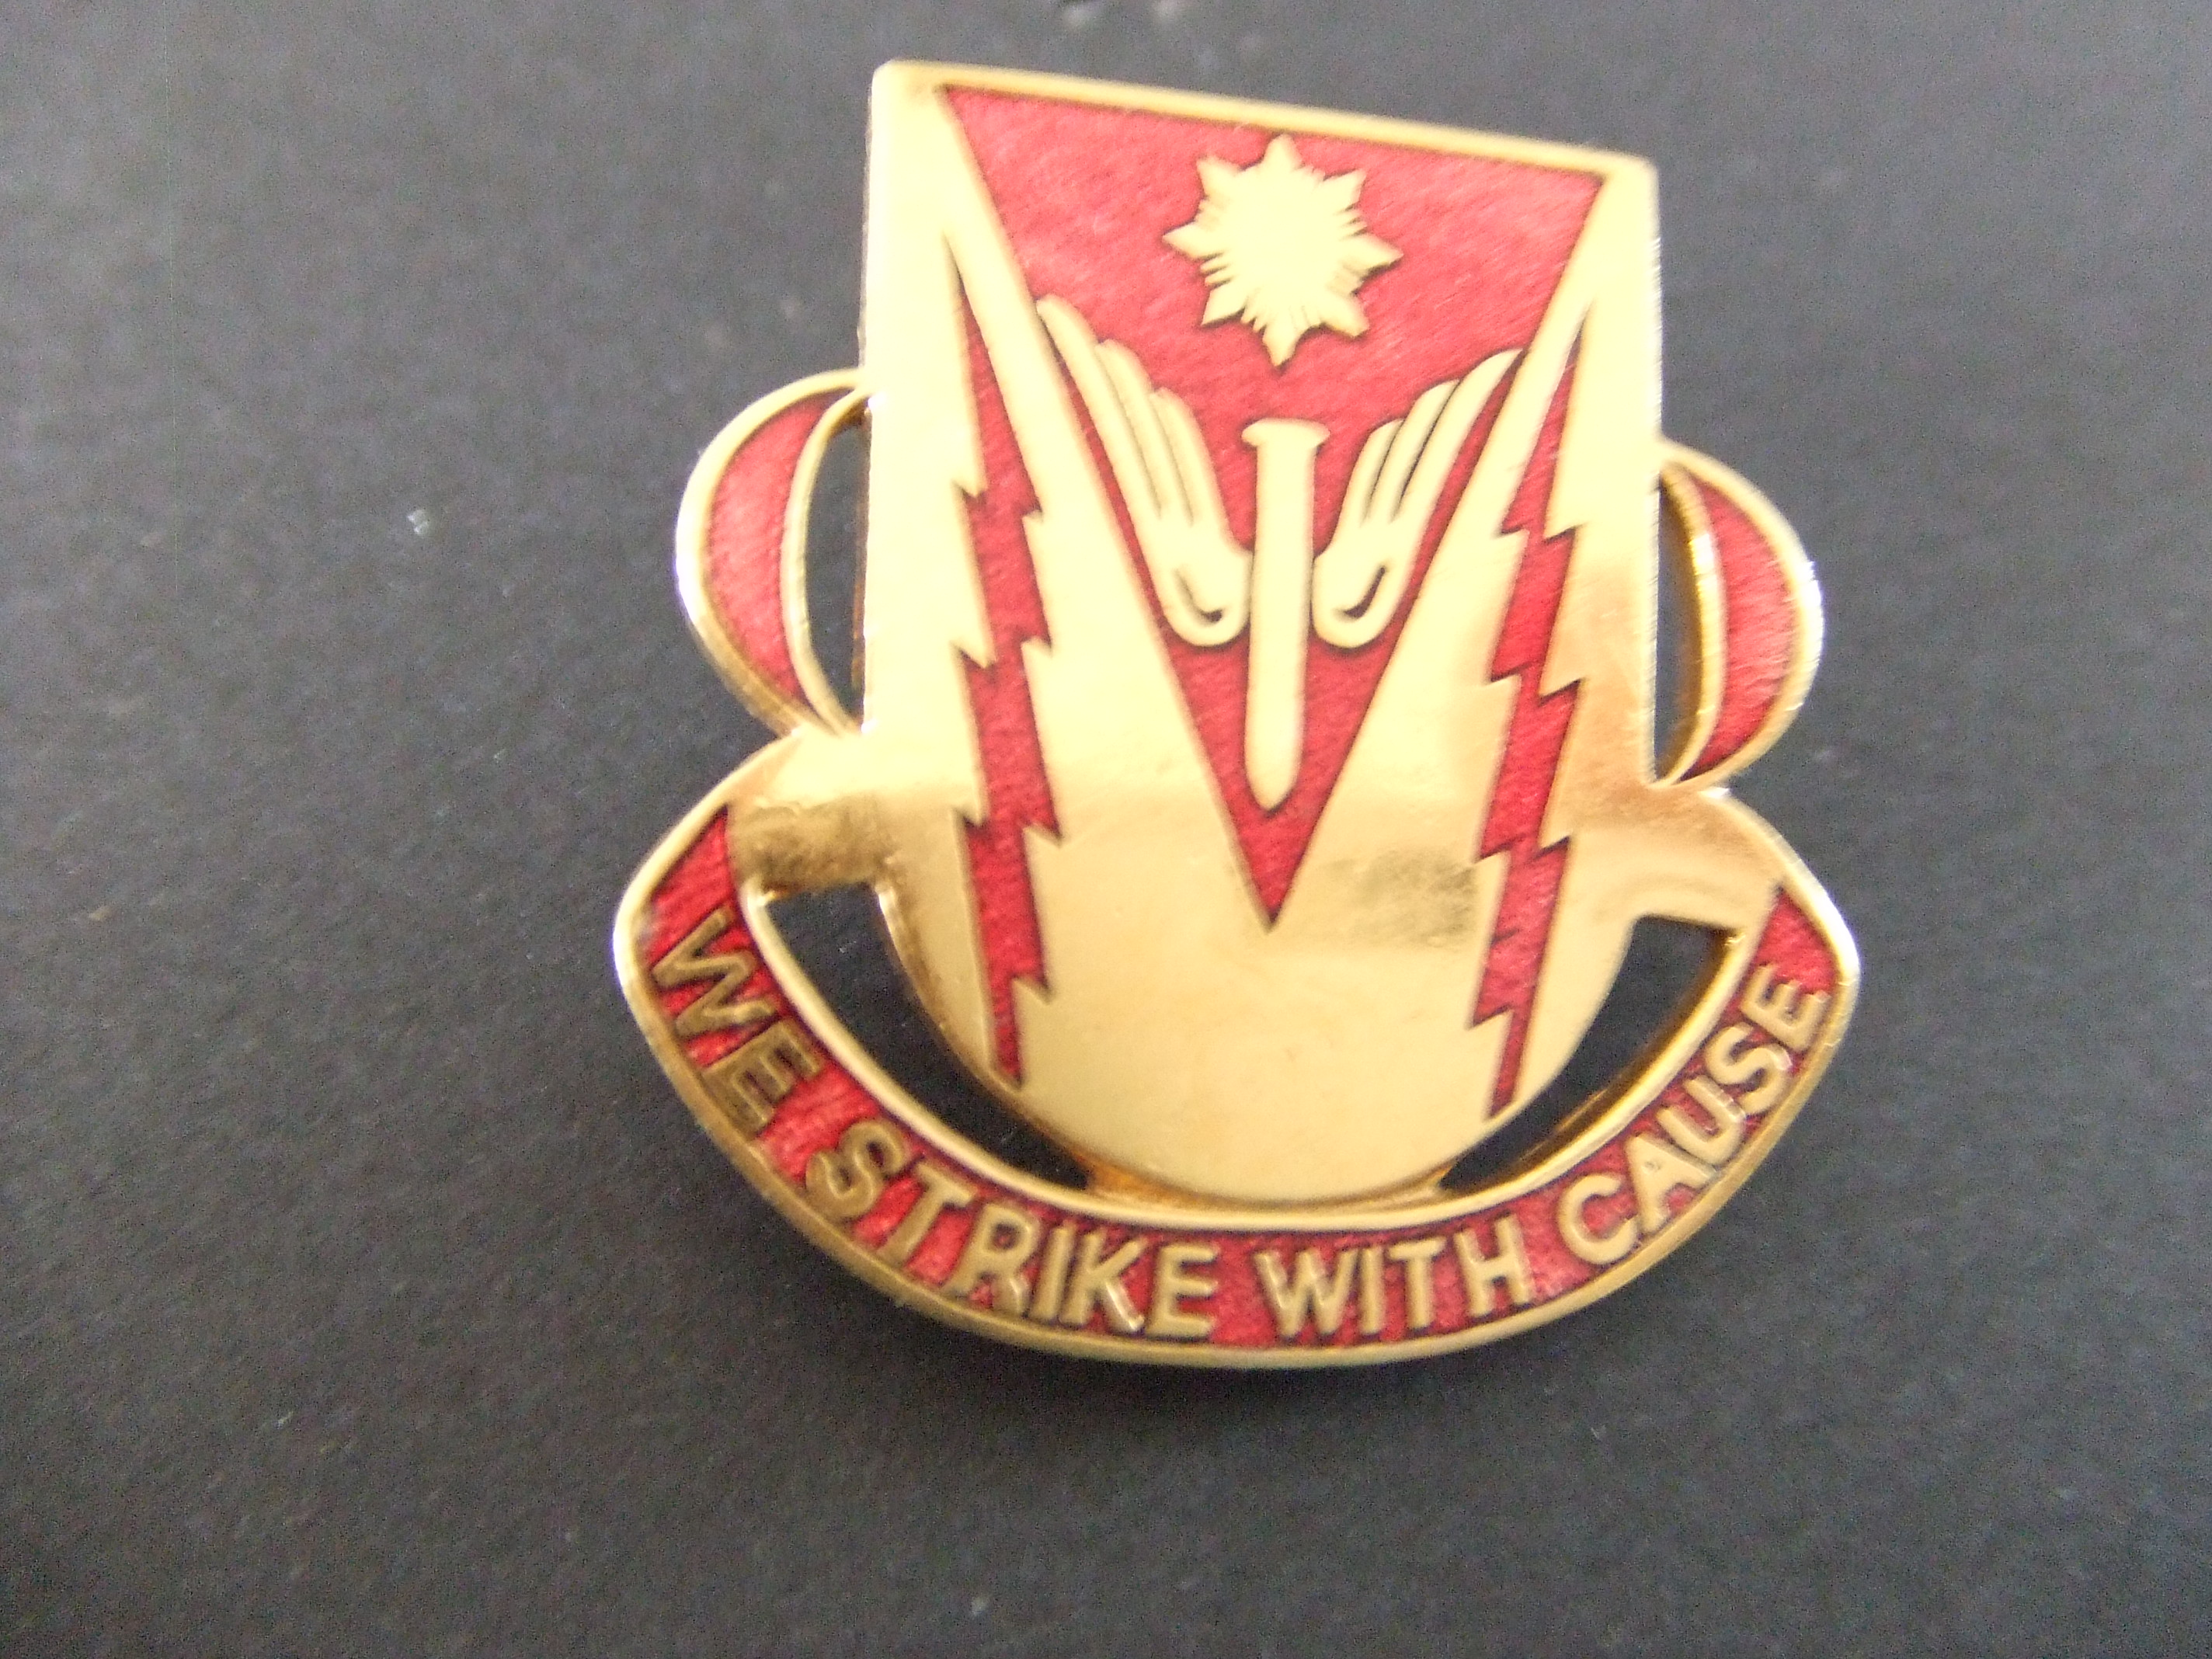 We Strike whith Cause US ARMY 88th Airborne Anti-Aircraft Artillery Battalion